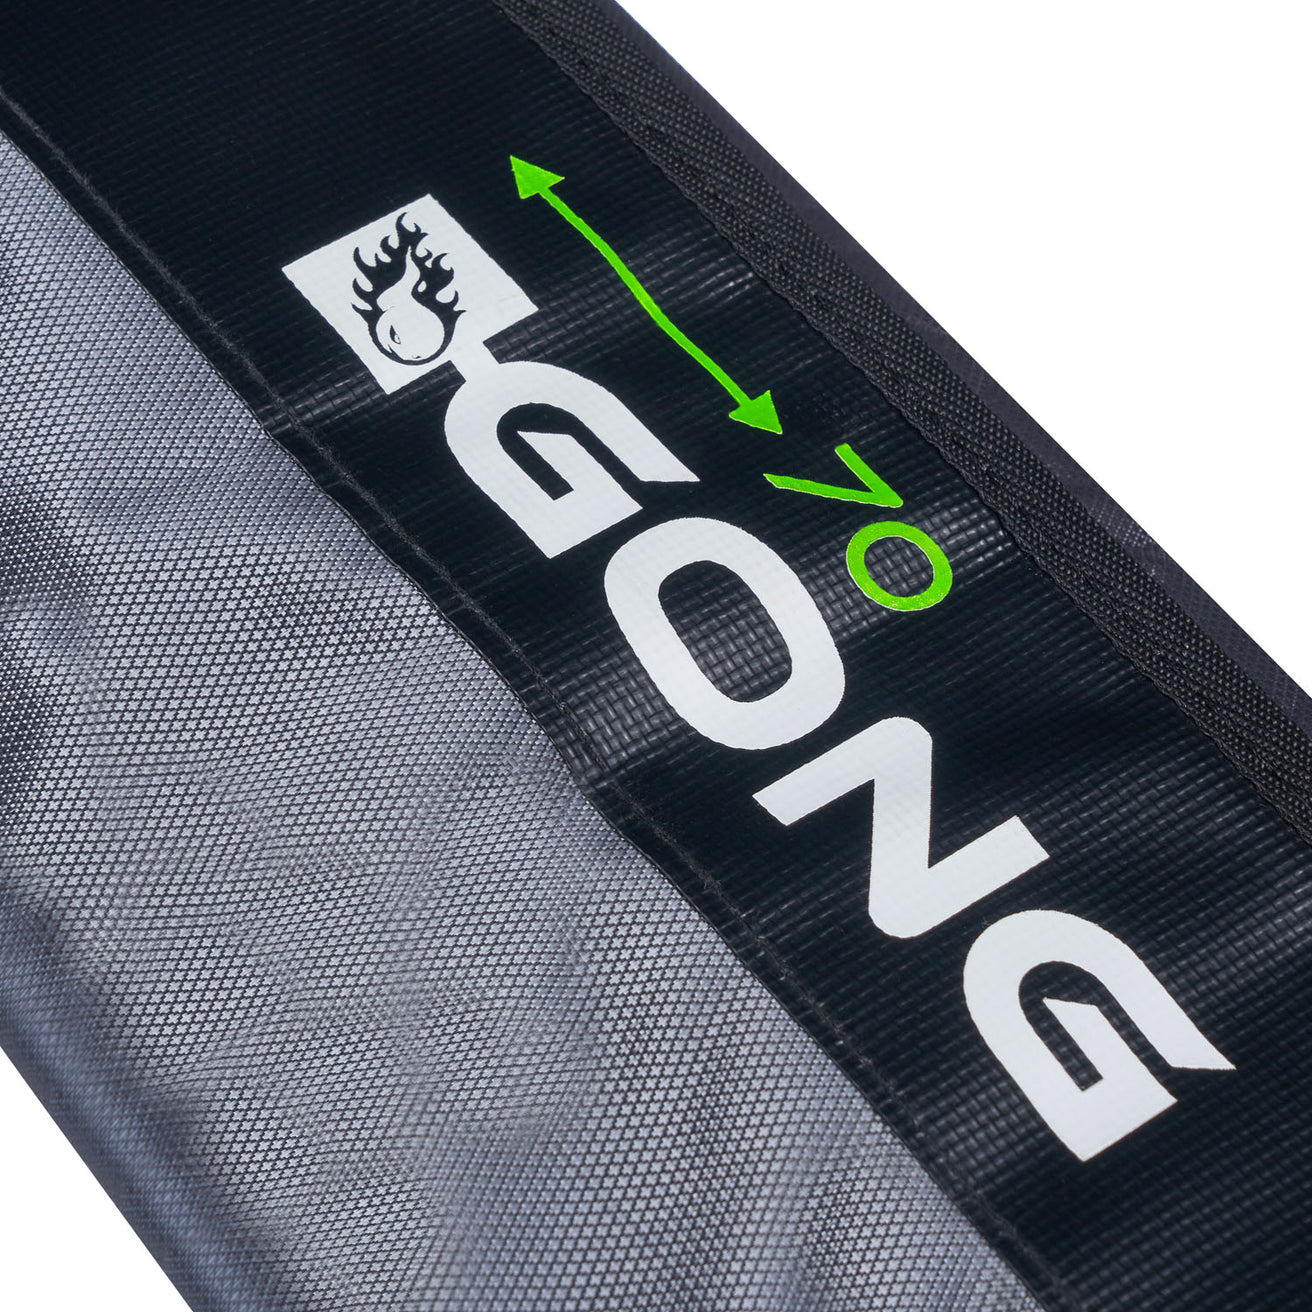 GONG | Foil Mast Cover